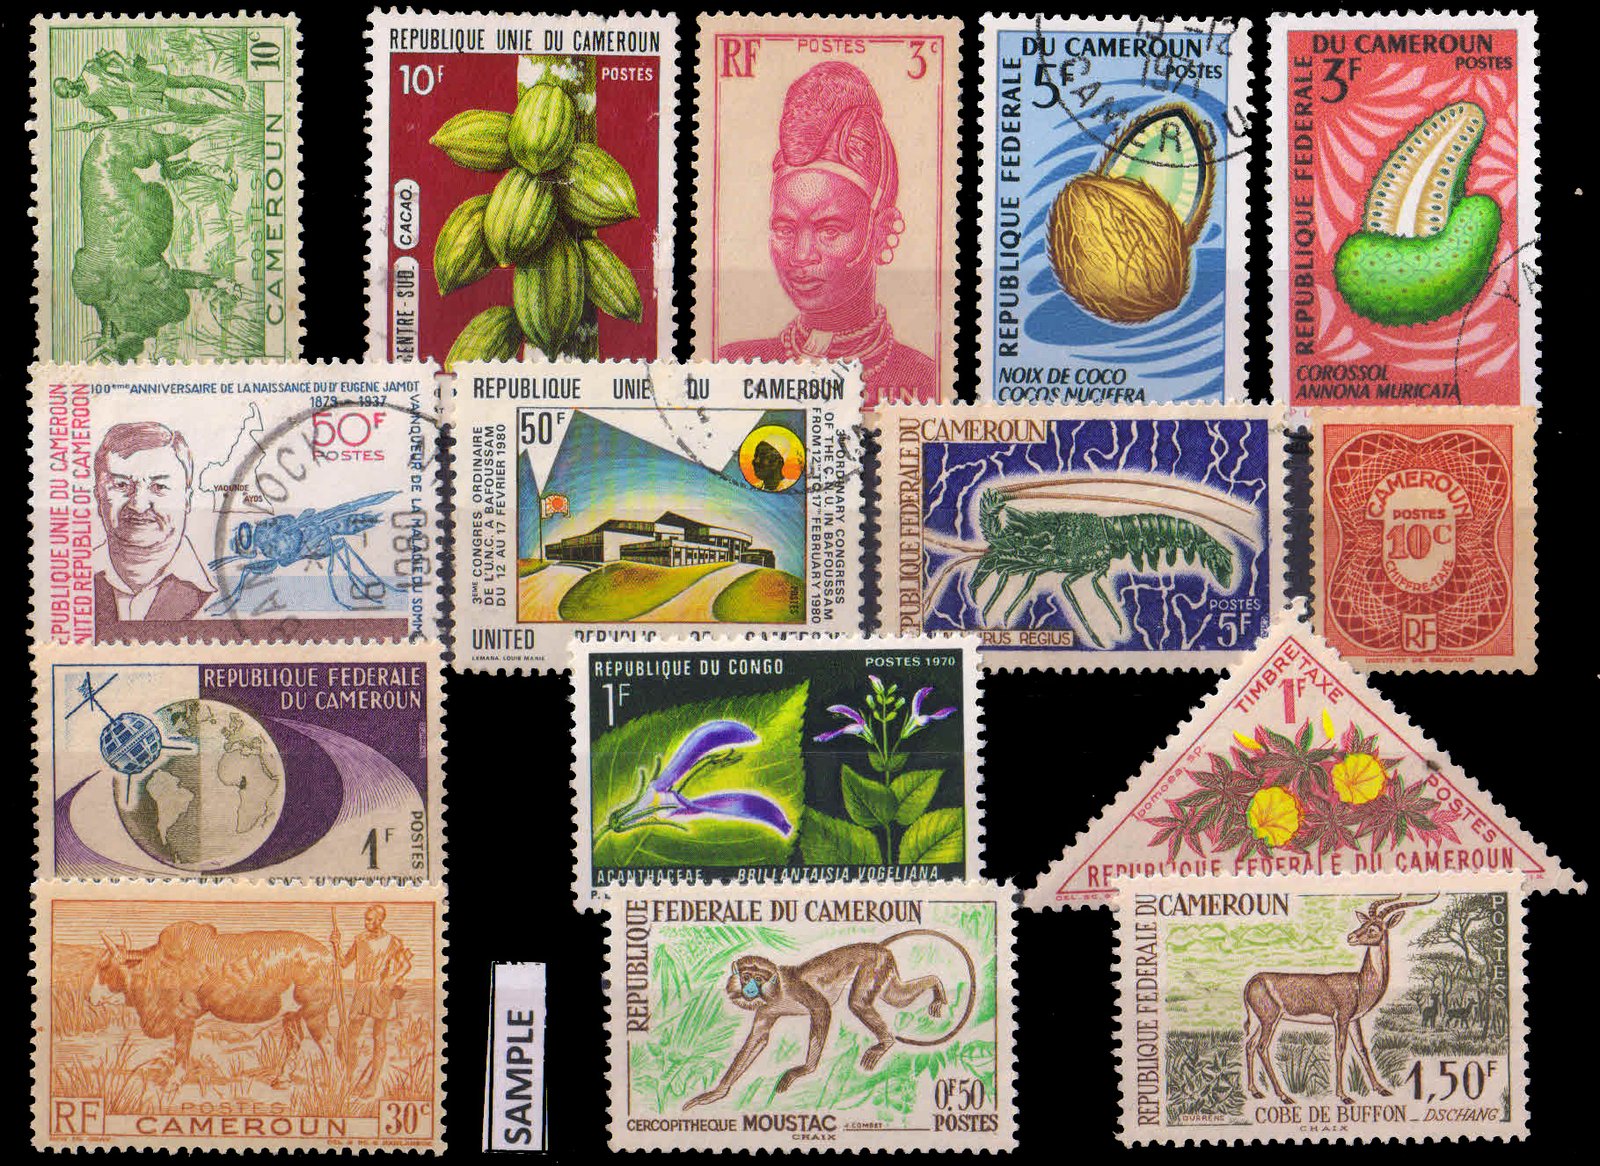 CAMEROUN - 15 Different Used and Mint, Large and Small Stamps